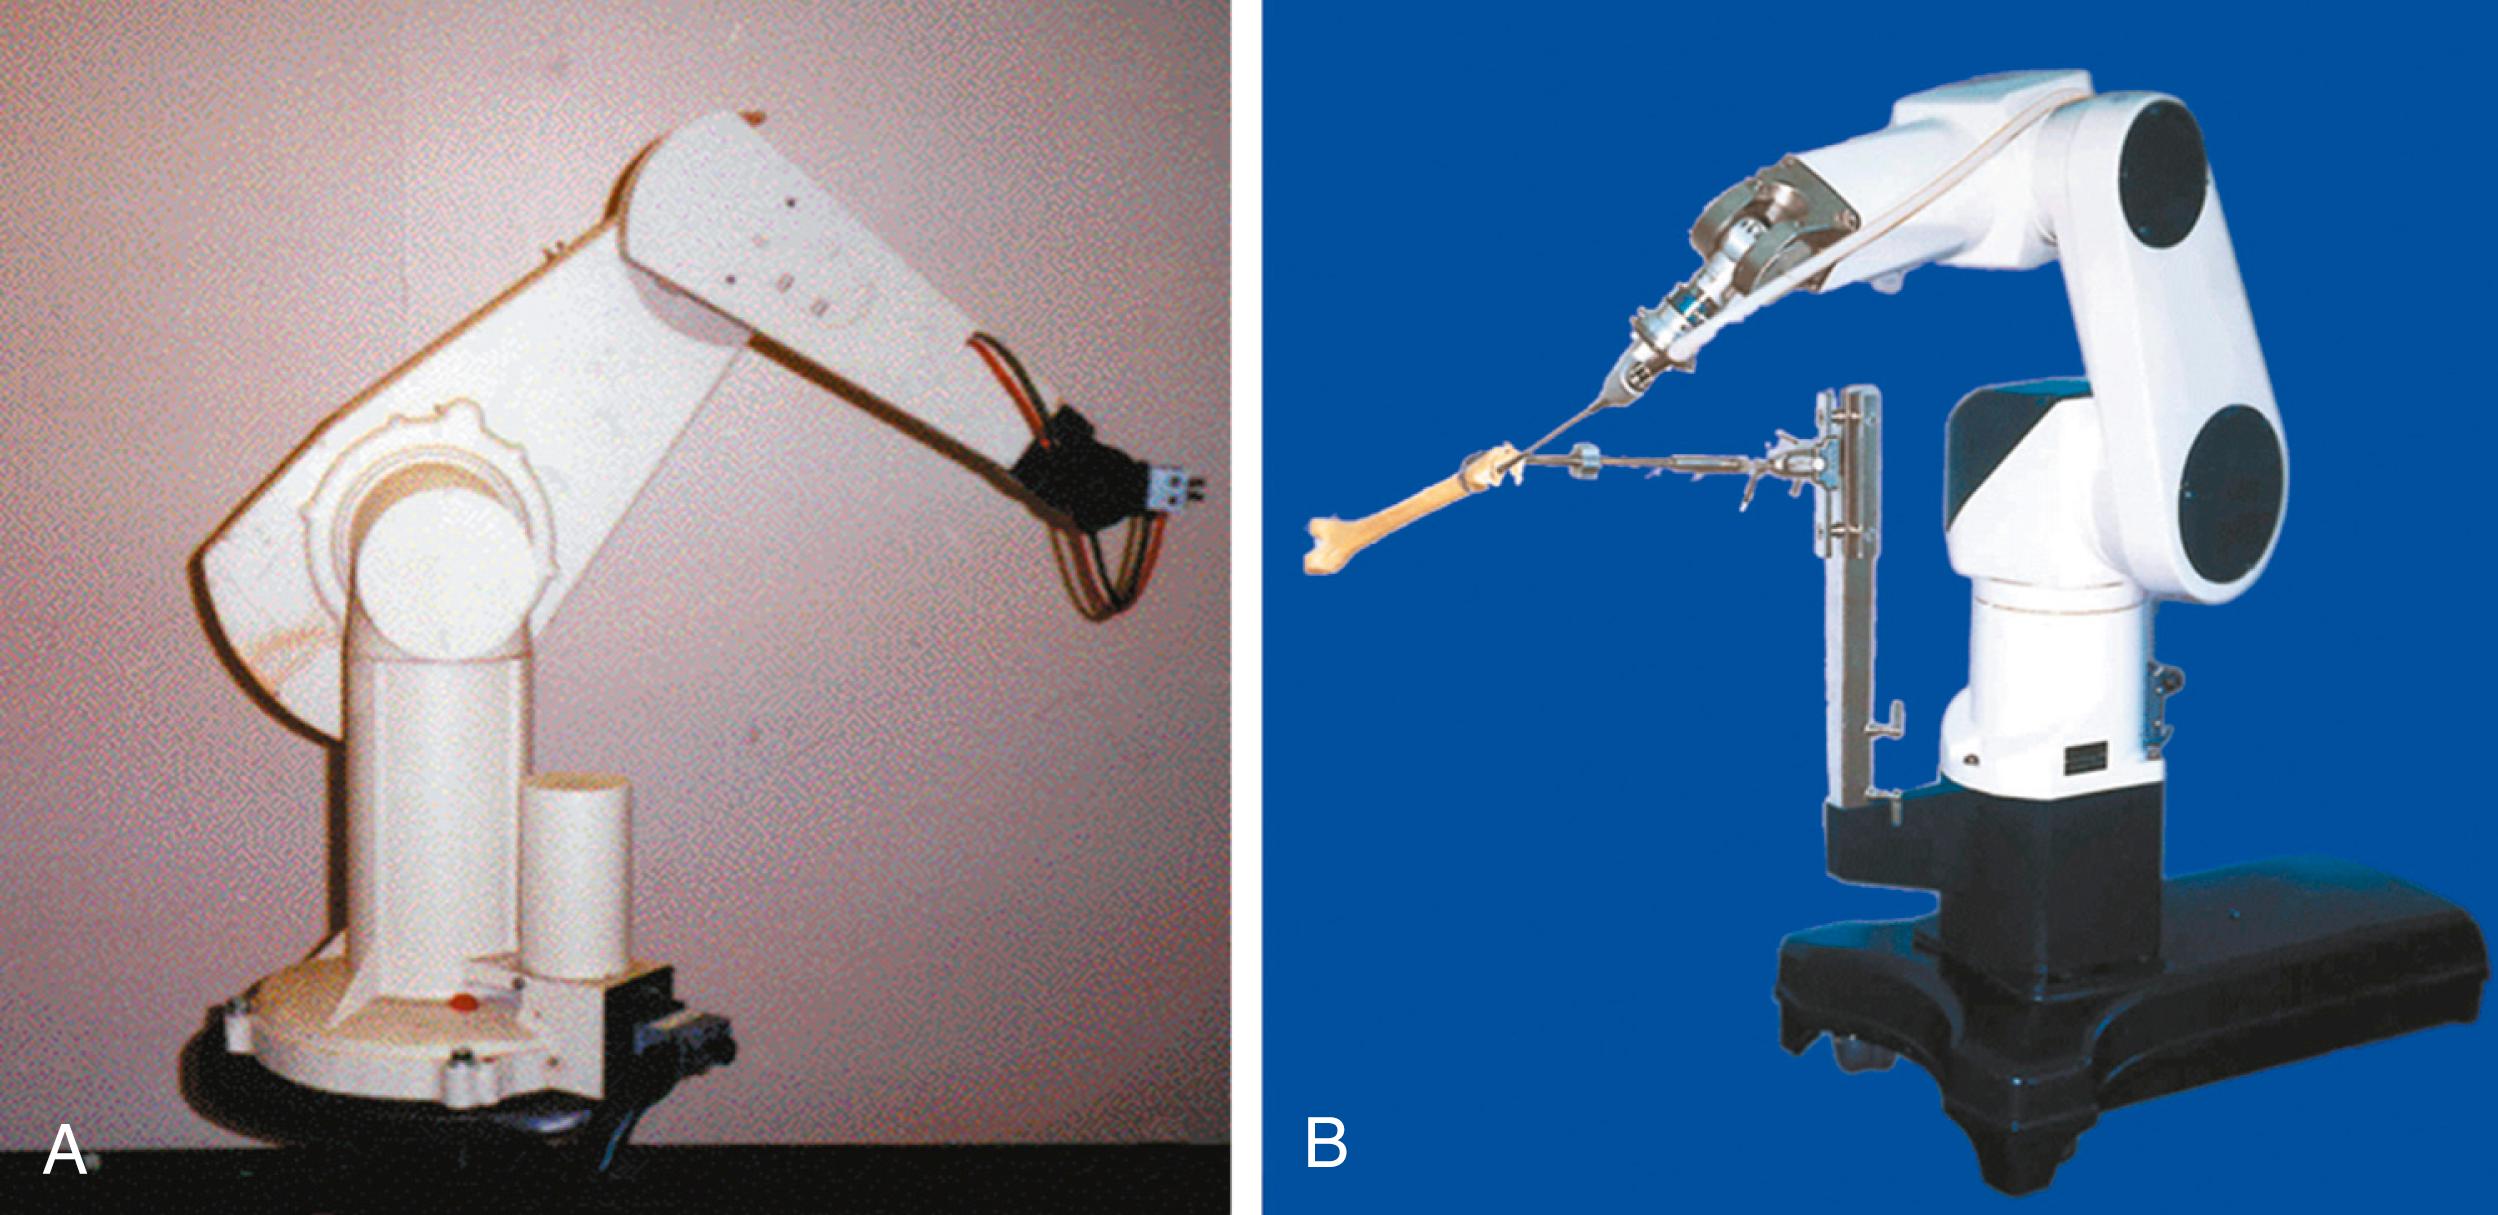 Figure 27-1, A, The Puma 560 was one of the first robotic systems designed. B, The ROBODOC was used to mill out precise fittings in the femur for hip replacements.